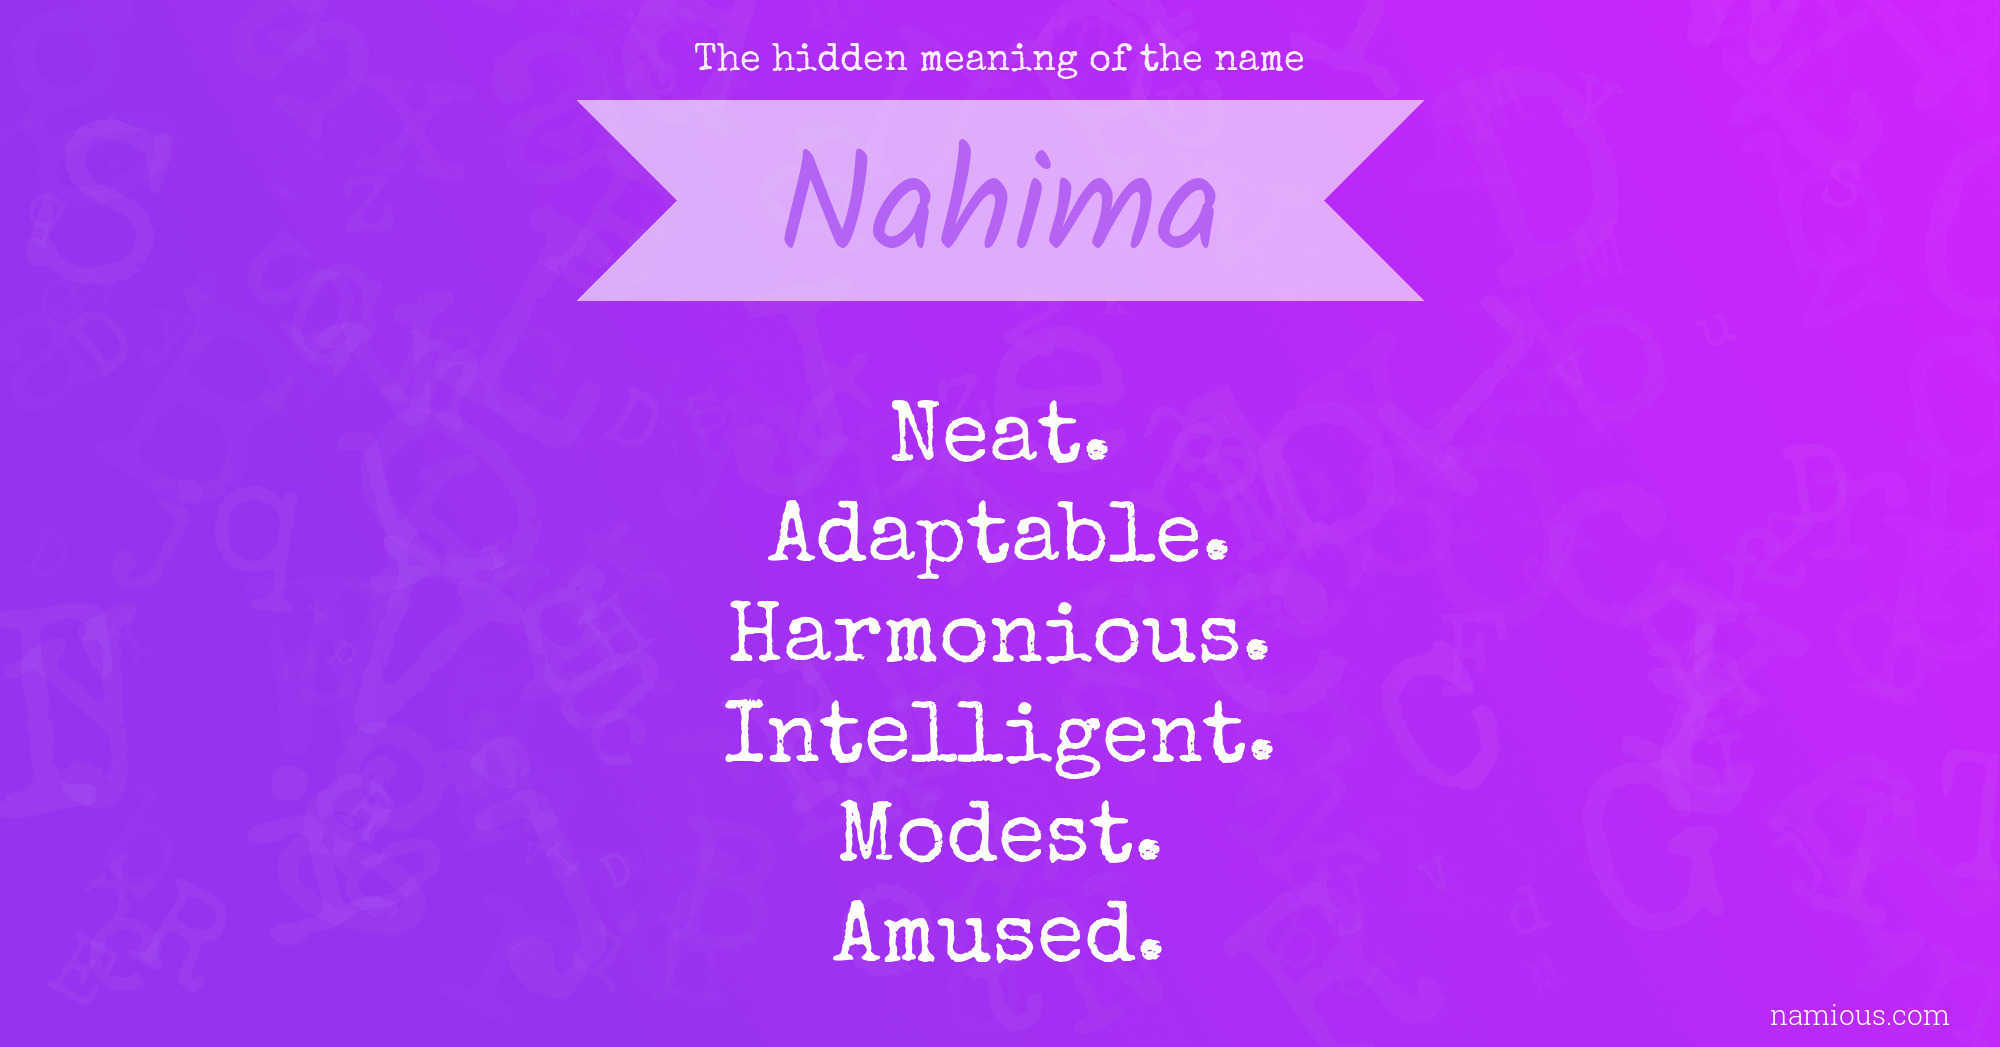 The hidden meaning of the name Nahima